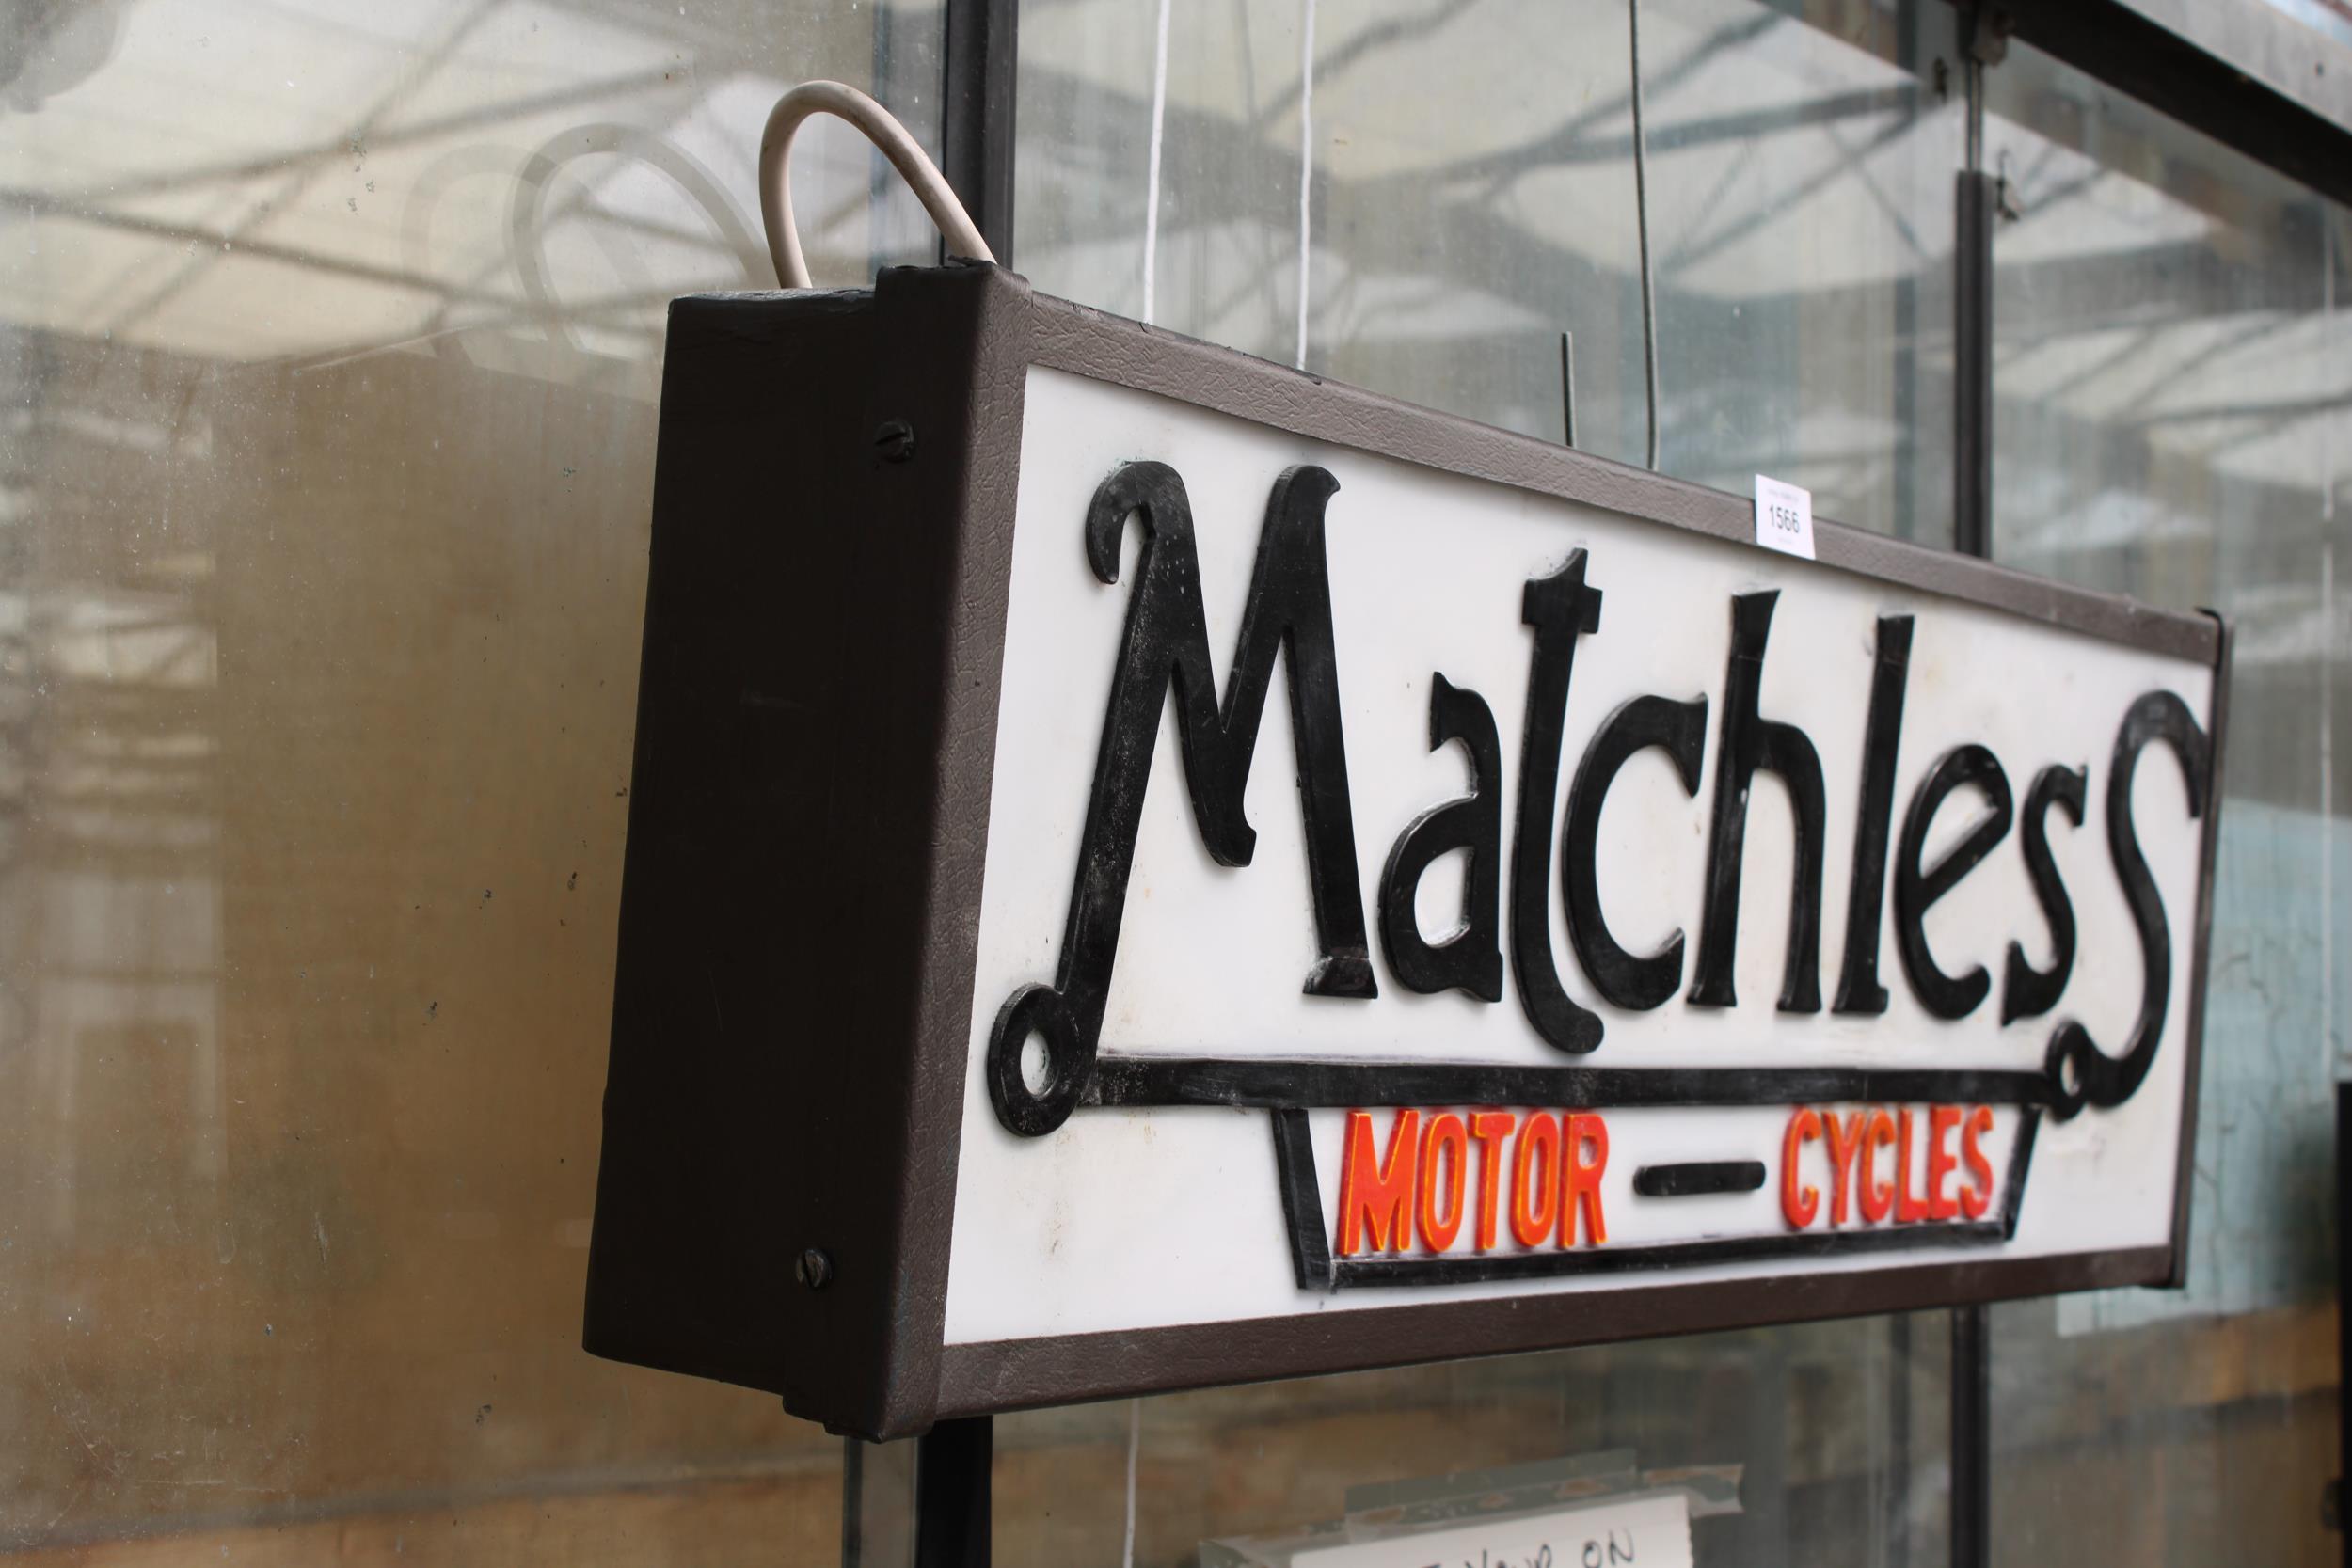 AN ILLUMINATED MATCHLESS MOTOR-CYCLES SIGN - Image 2 of 2